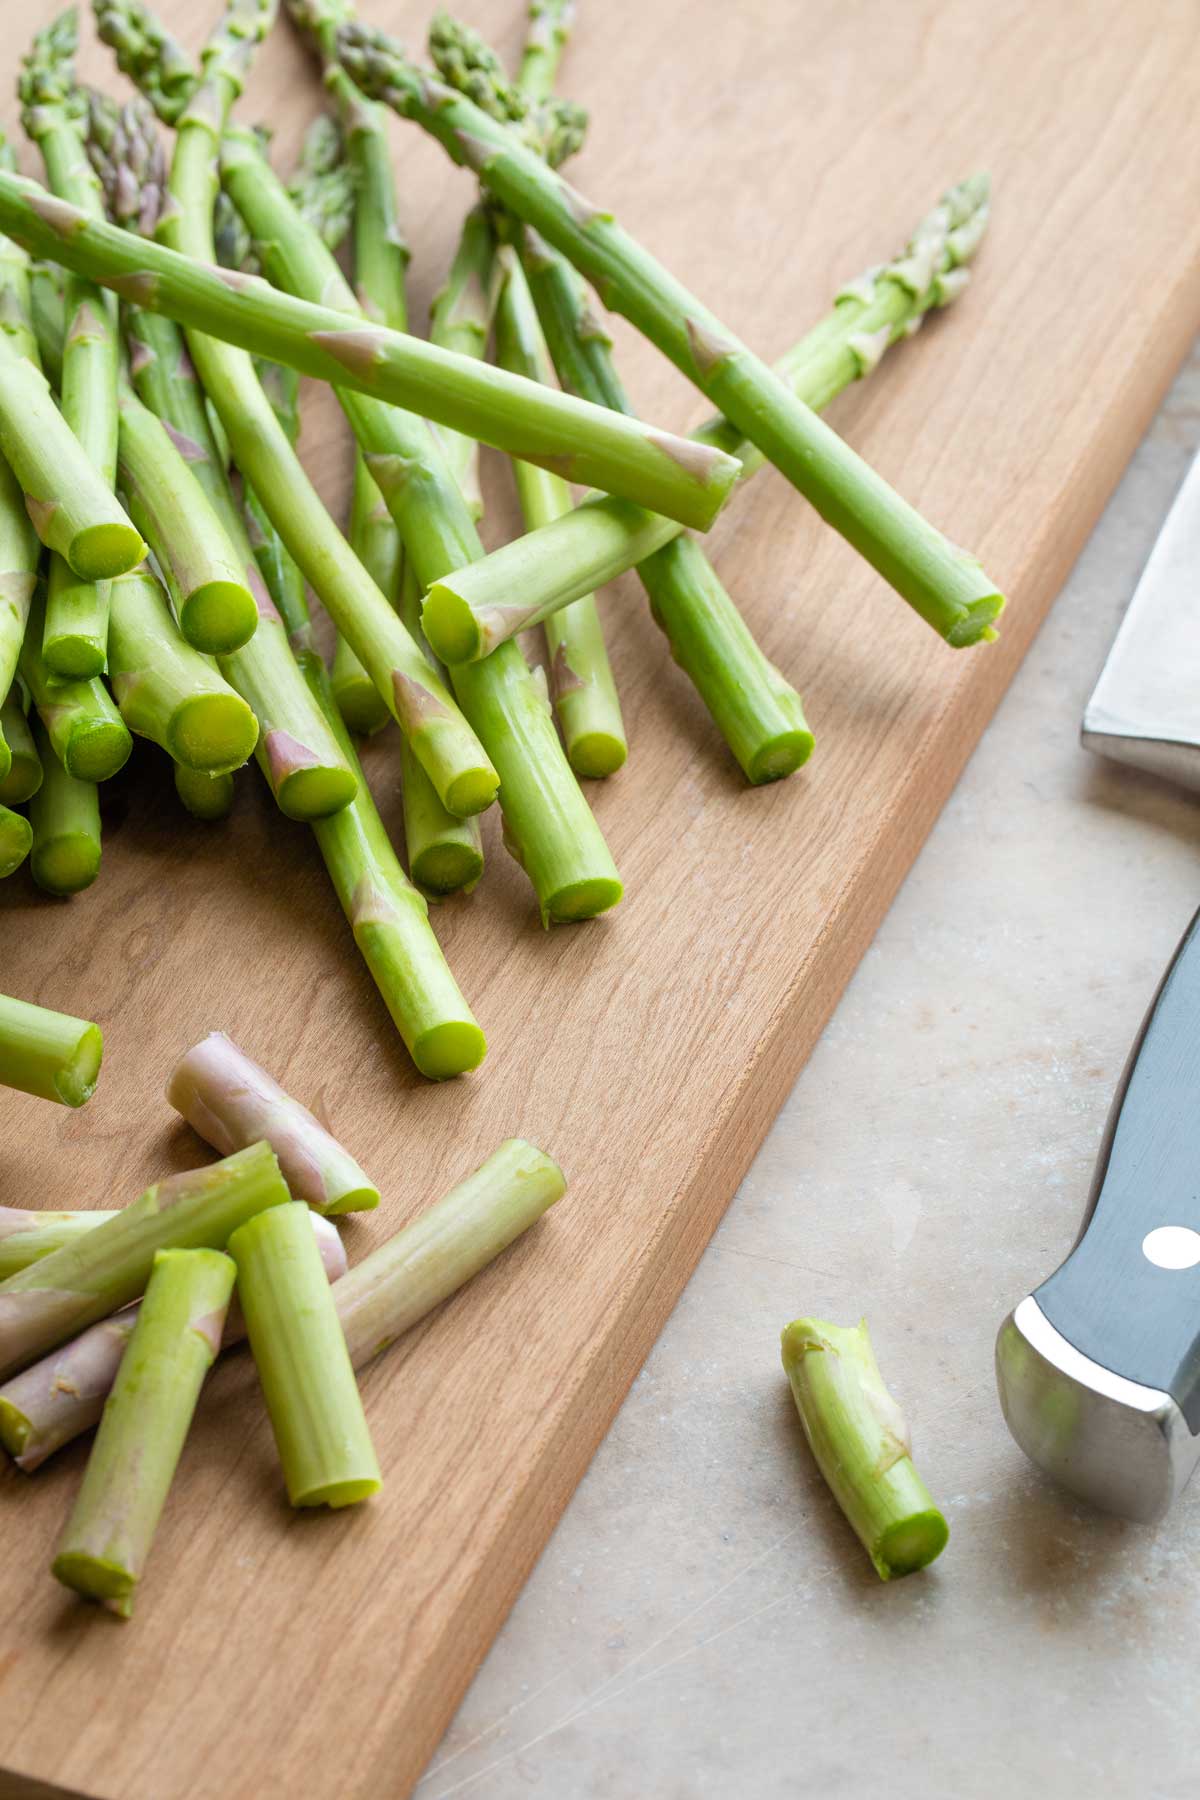 Pile of raw asparagus on cutting board, with ends cut off and knife laying alongside.